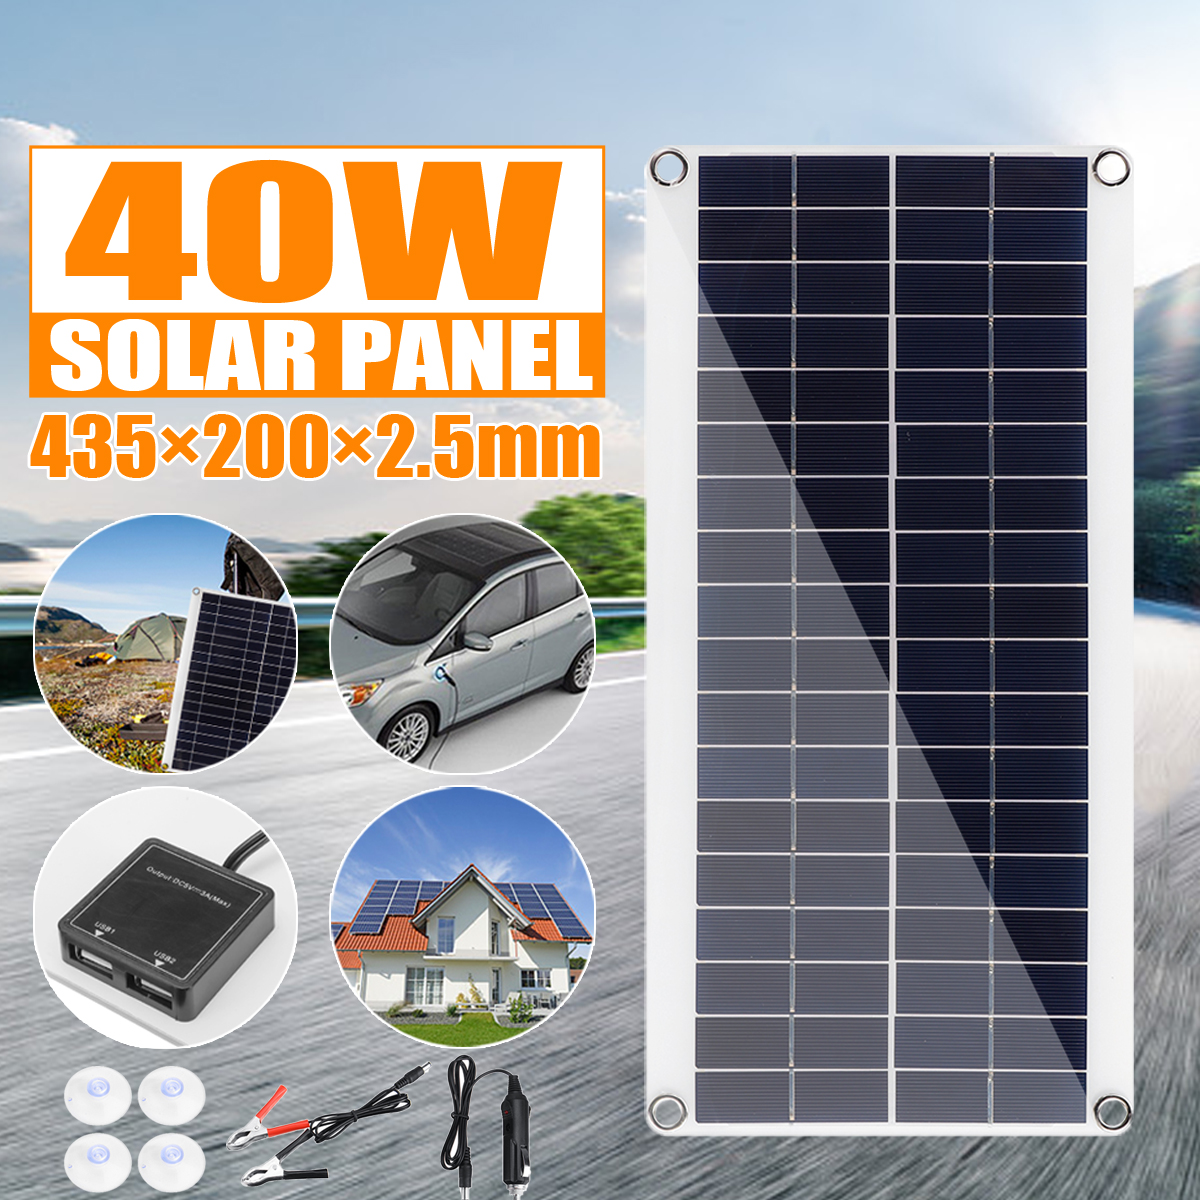 15W-18V-435times200times25mm-Polysilicon-Solar-Panel-for-RV-Roof-Boat-1557371-1